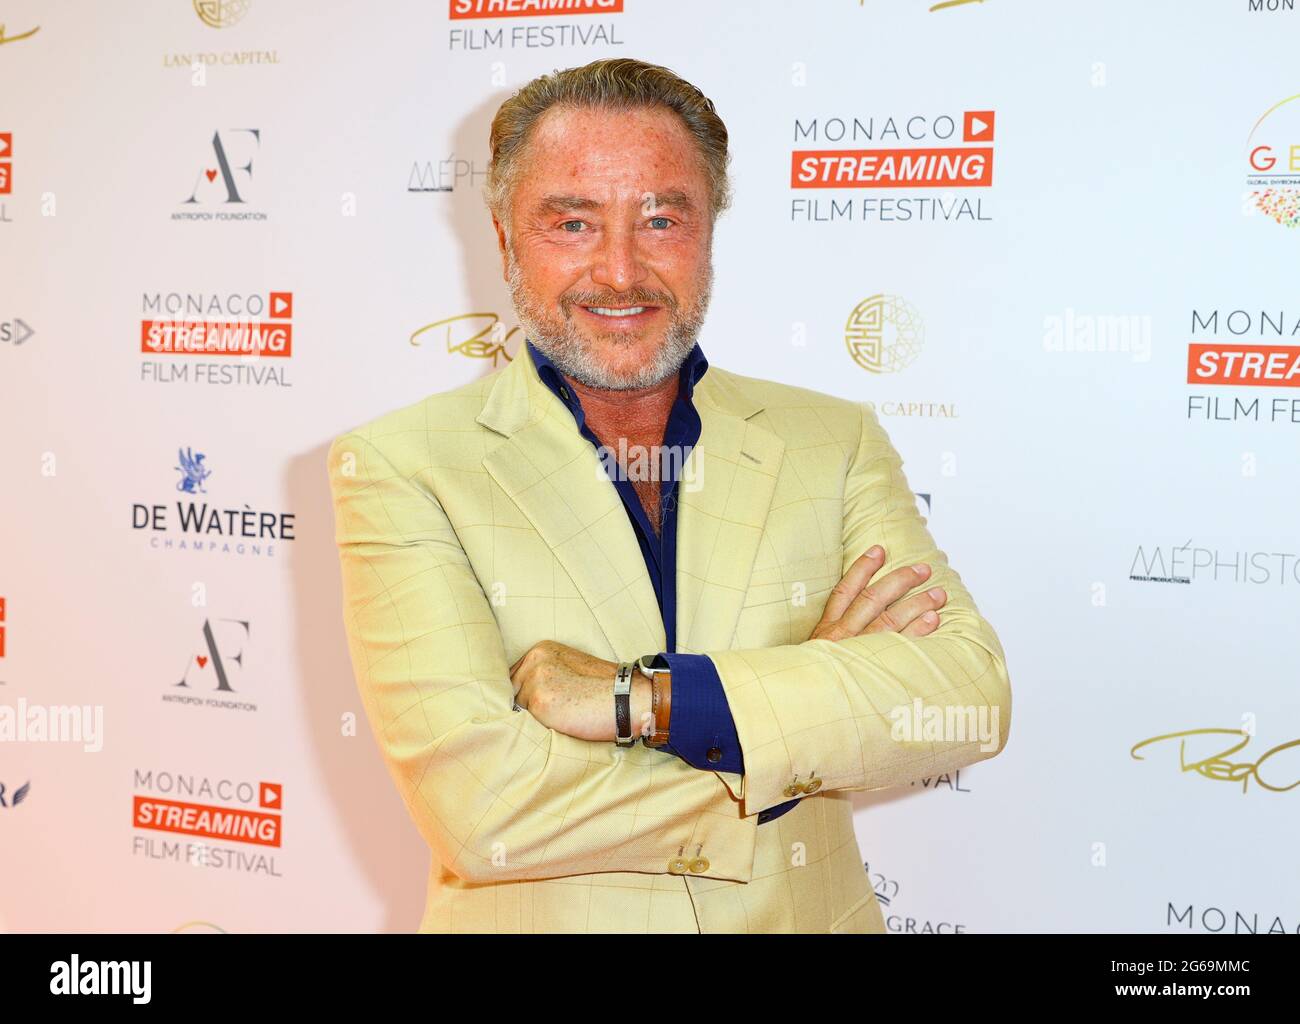 Monaco, Monte-Carlo - July 03, 2021: Monaco Streaming Film Festival MCSFF  with Michael Flatley, Riverdance and Lord of The Dance Producer and Star  Stock Photo - Alamy